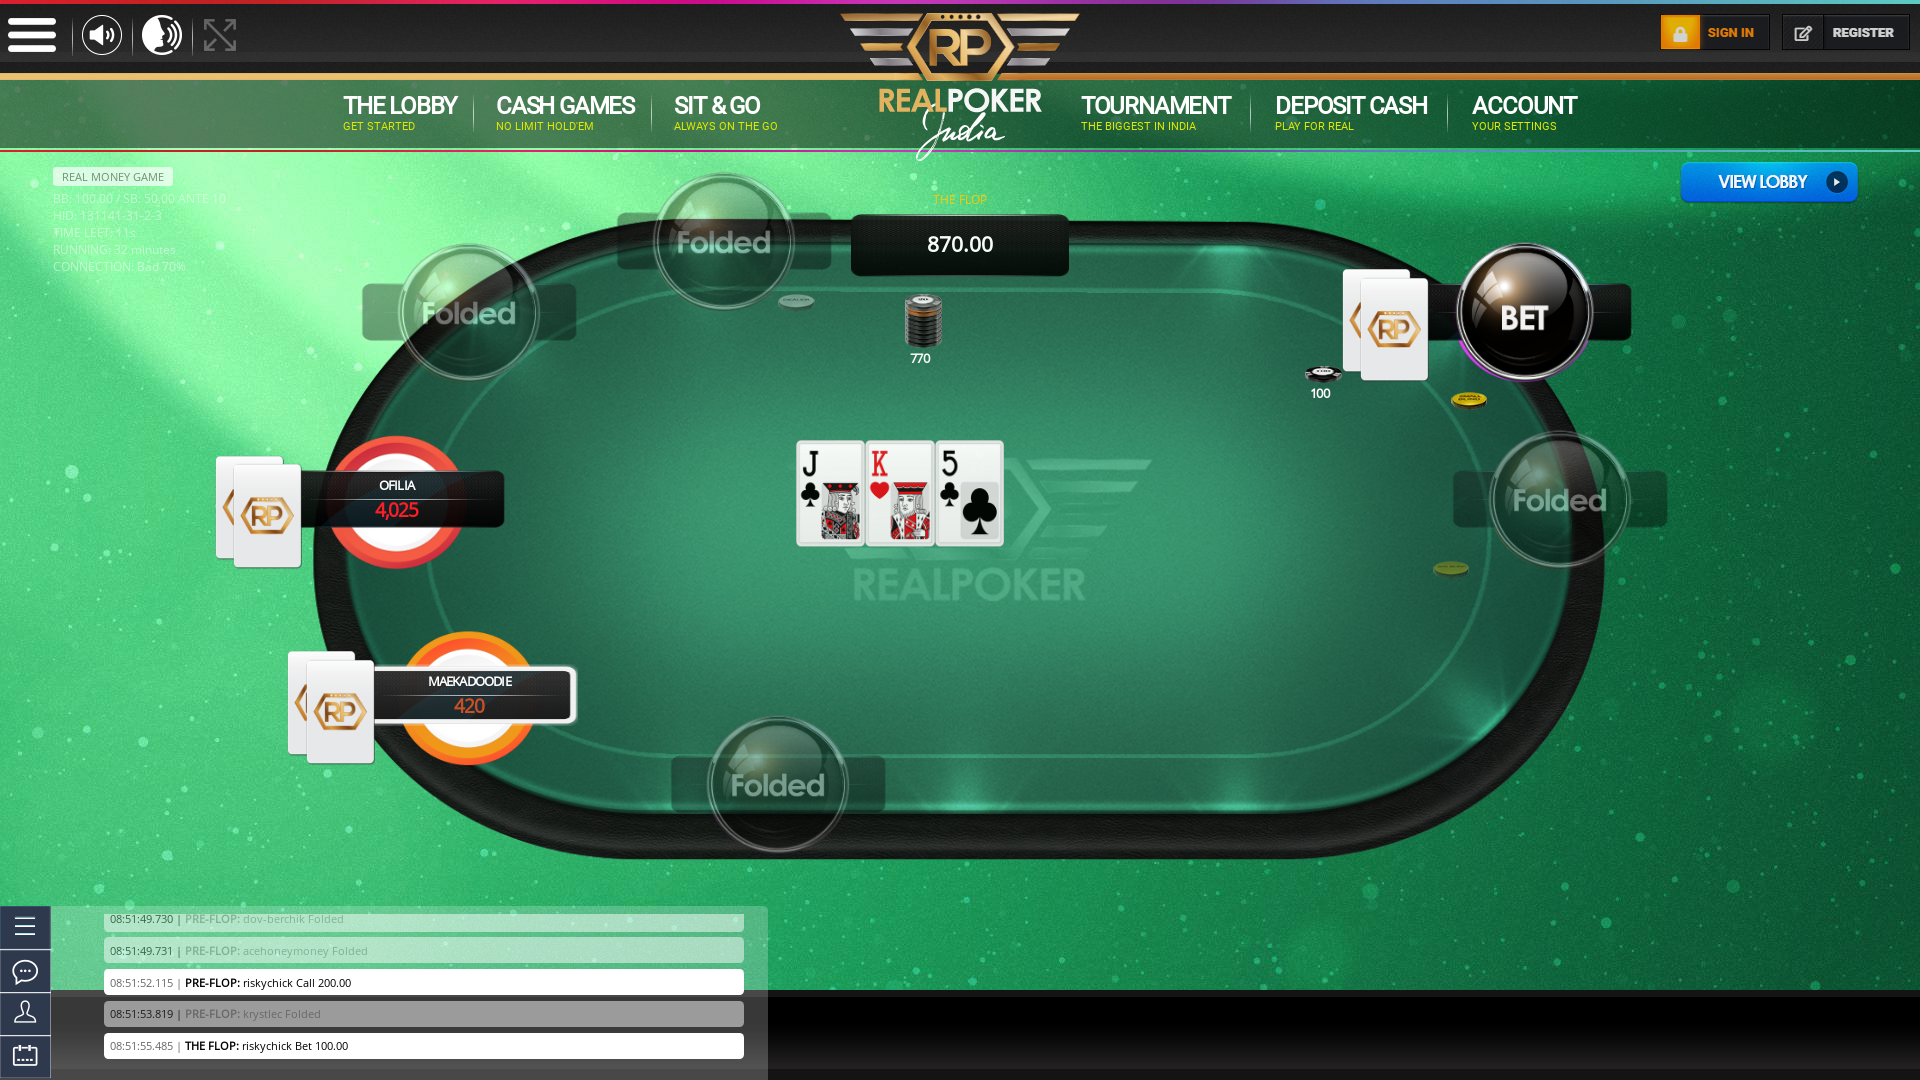 Real poker 10 player table in the 3 match